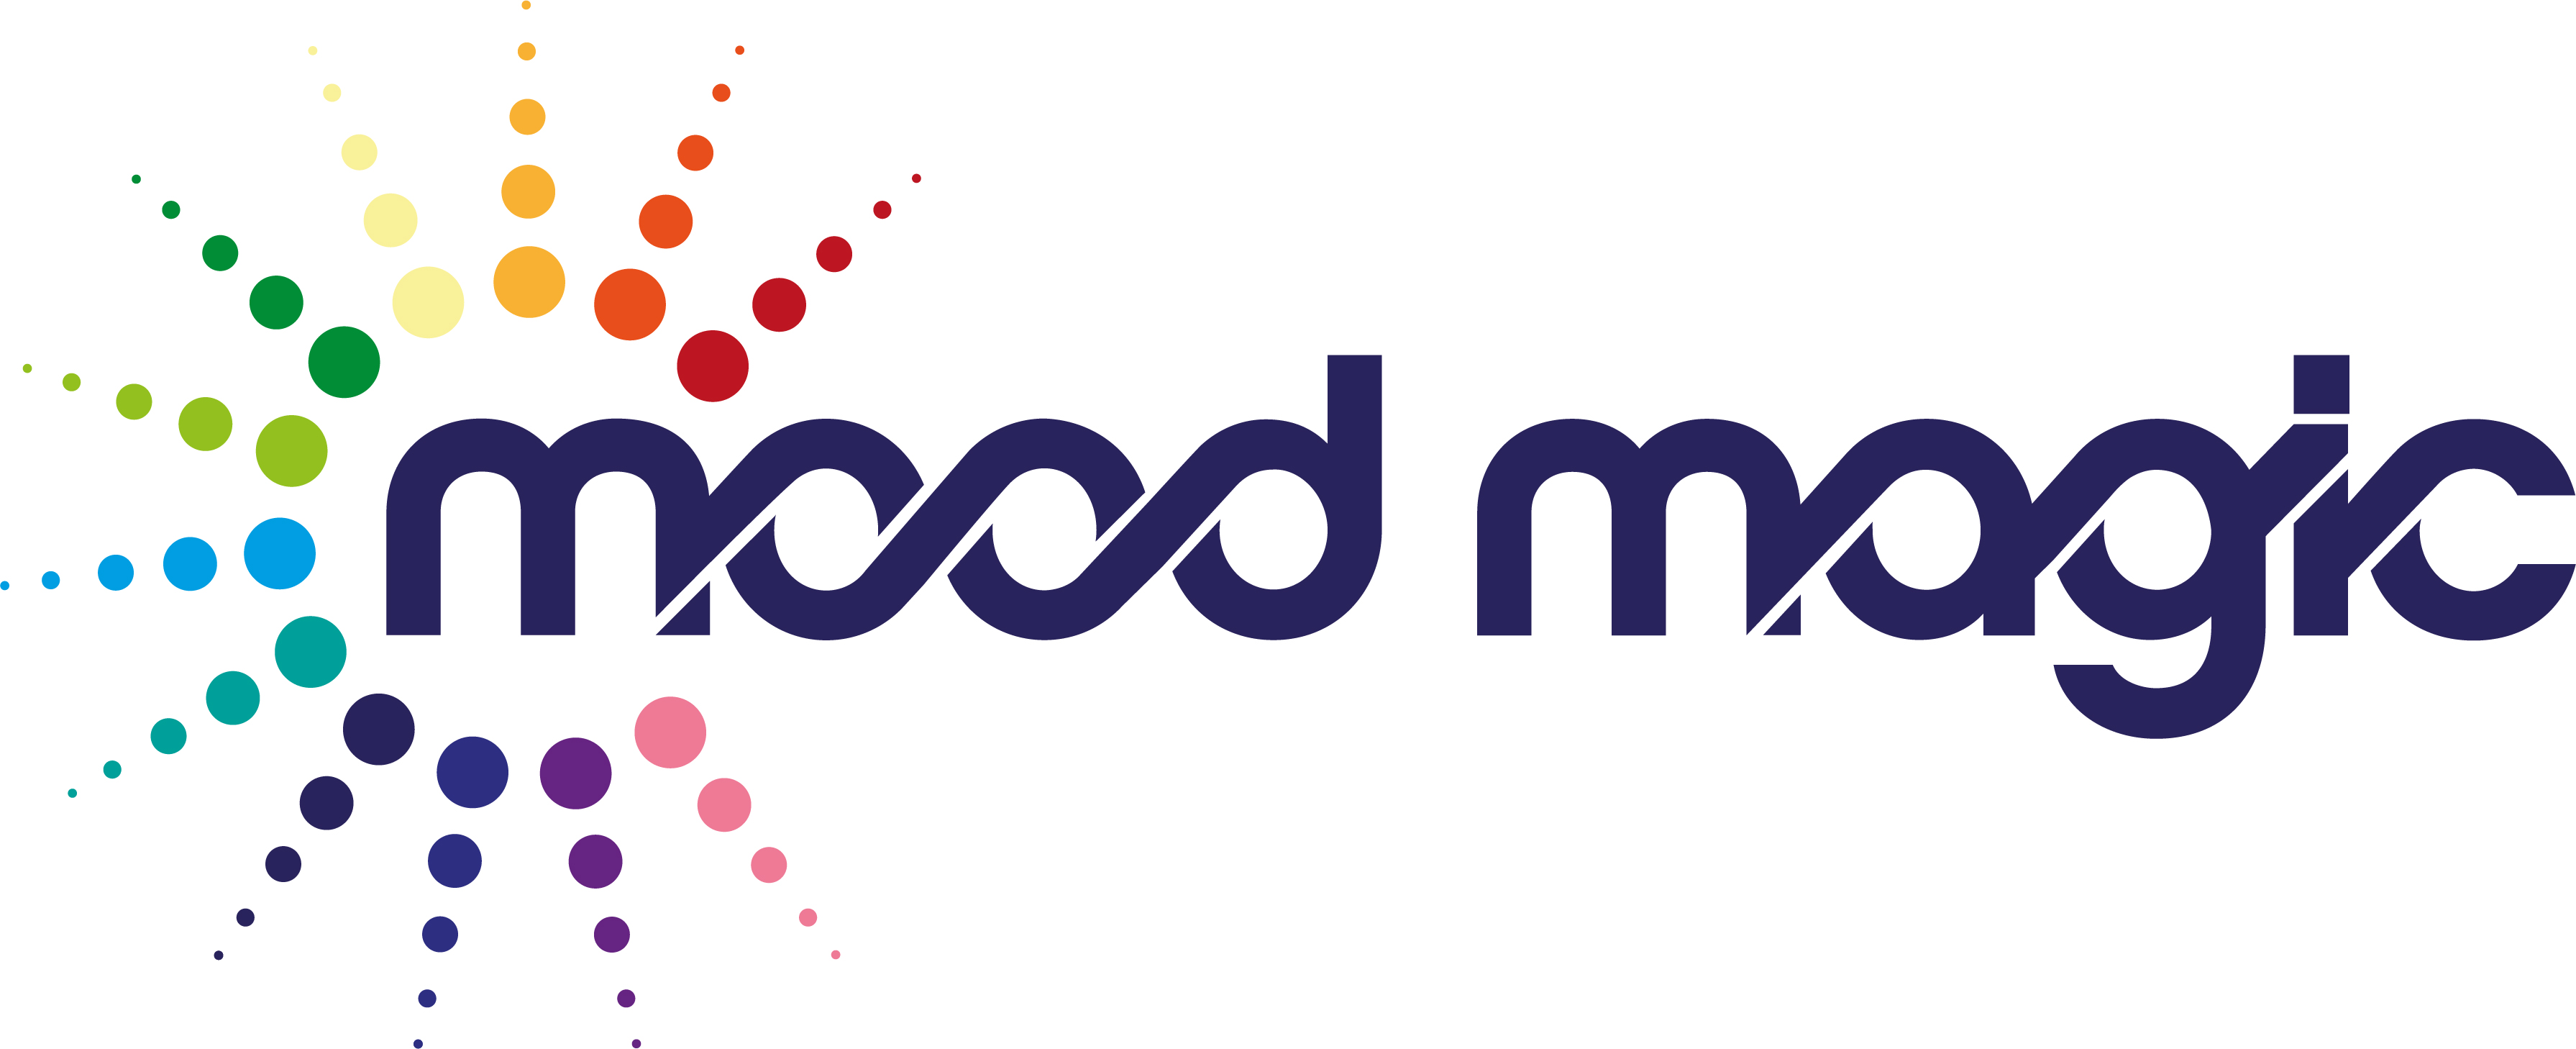 Mood Magic_01 logo design by logo designer John Mills Ltd for your inspiration and for the worlds largest logo competition